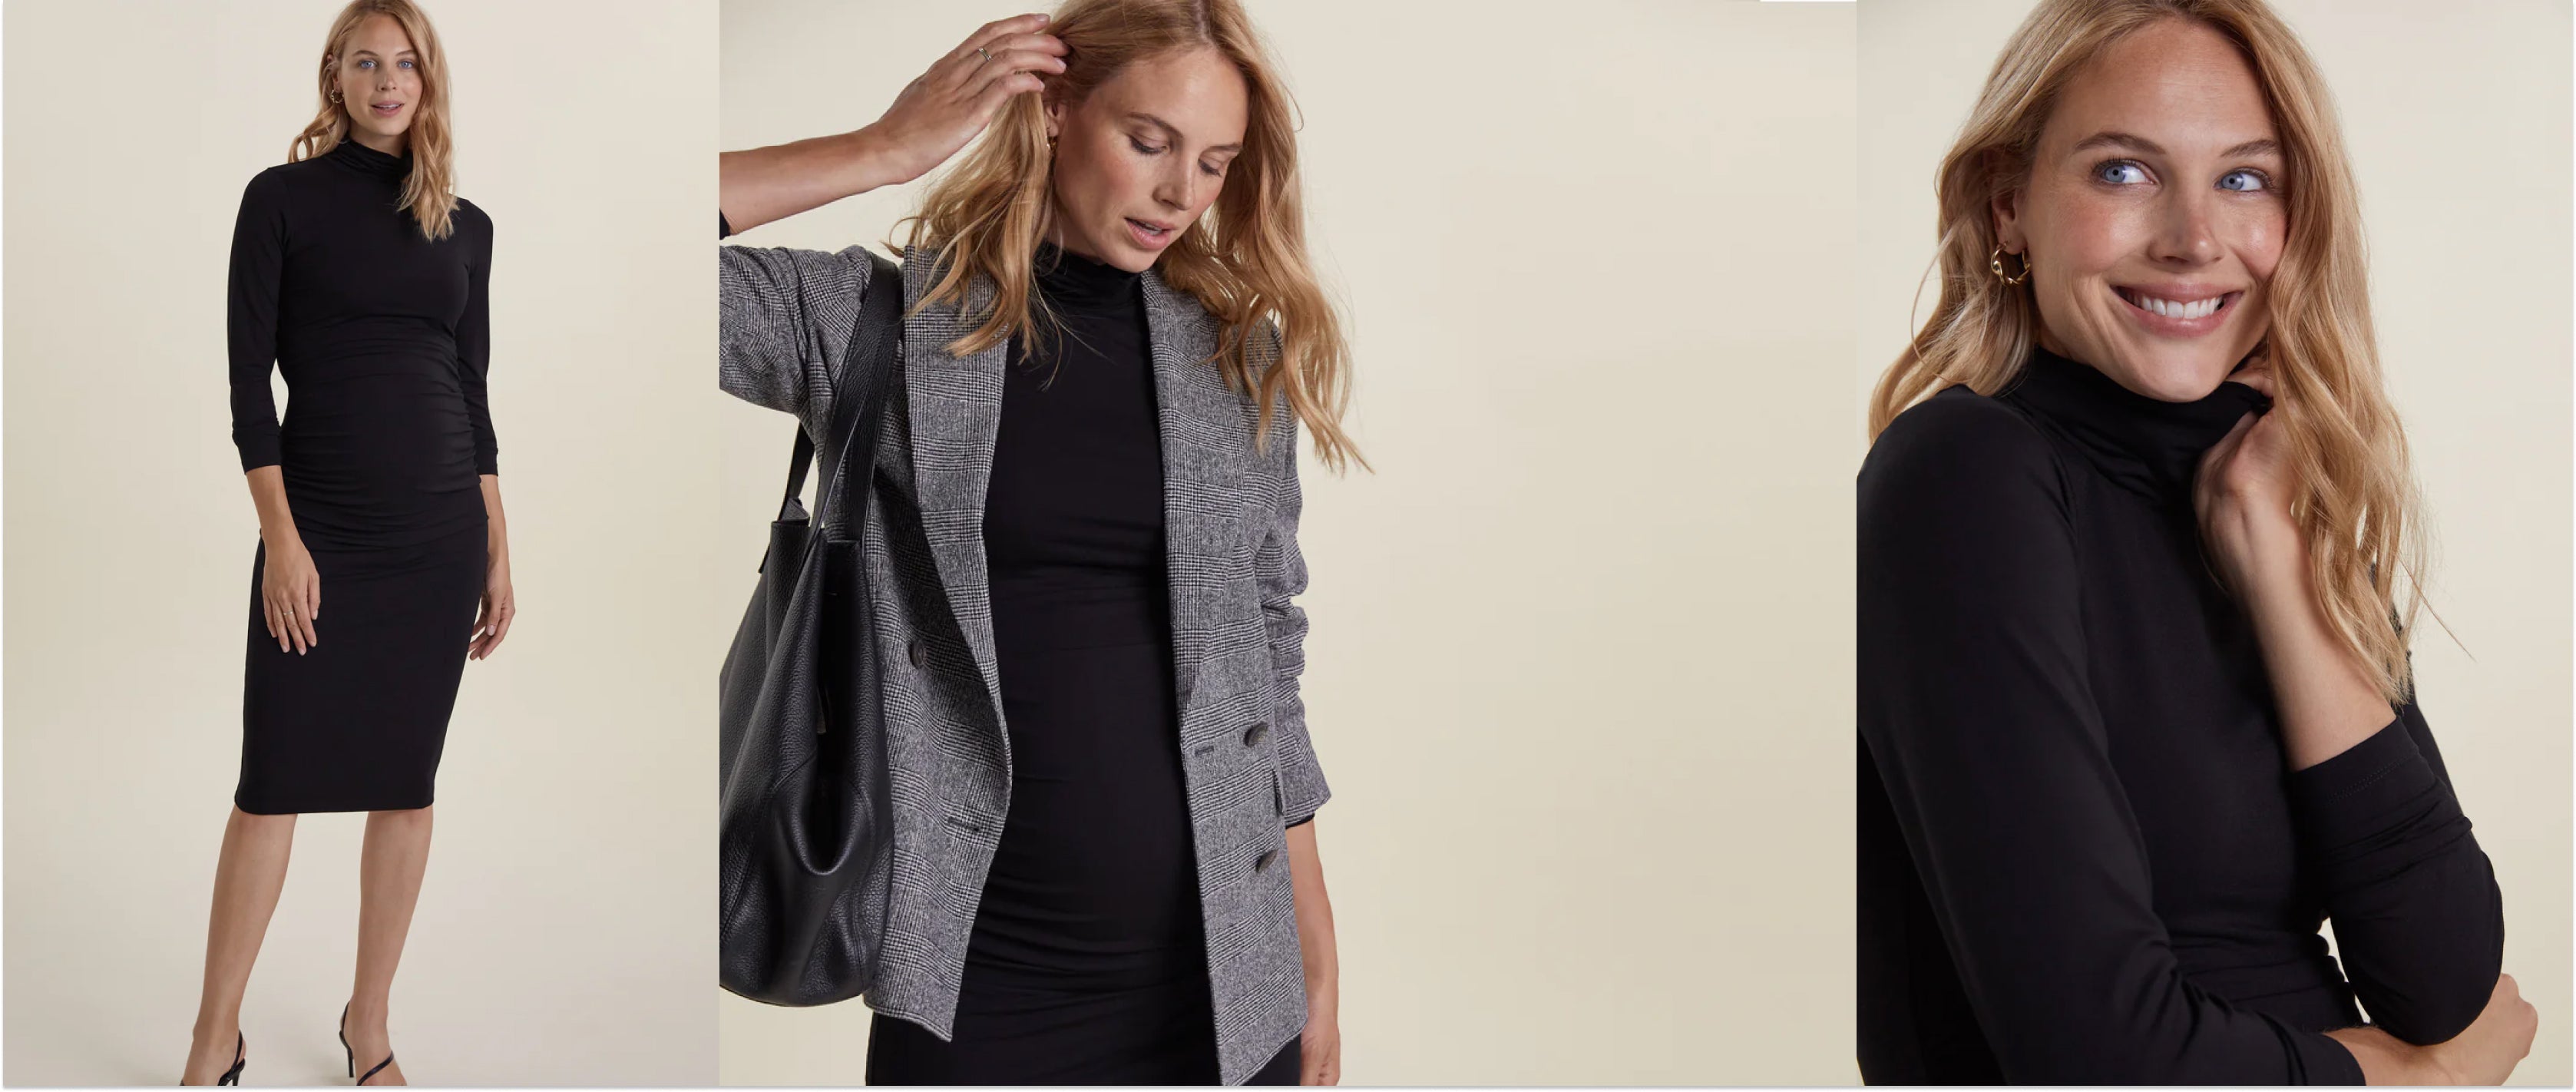 How to put together your maternity workwear wardrobe